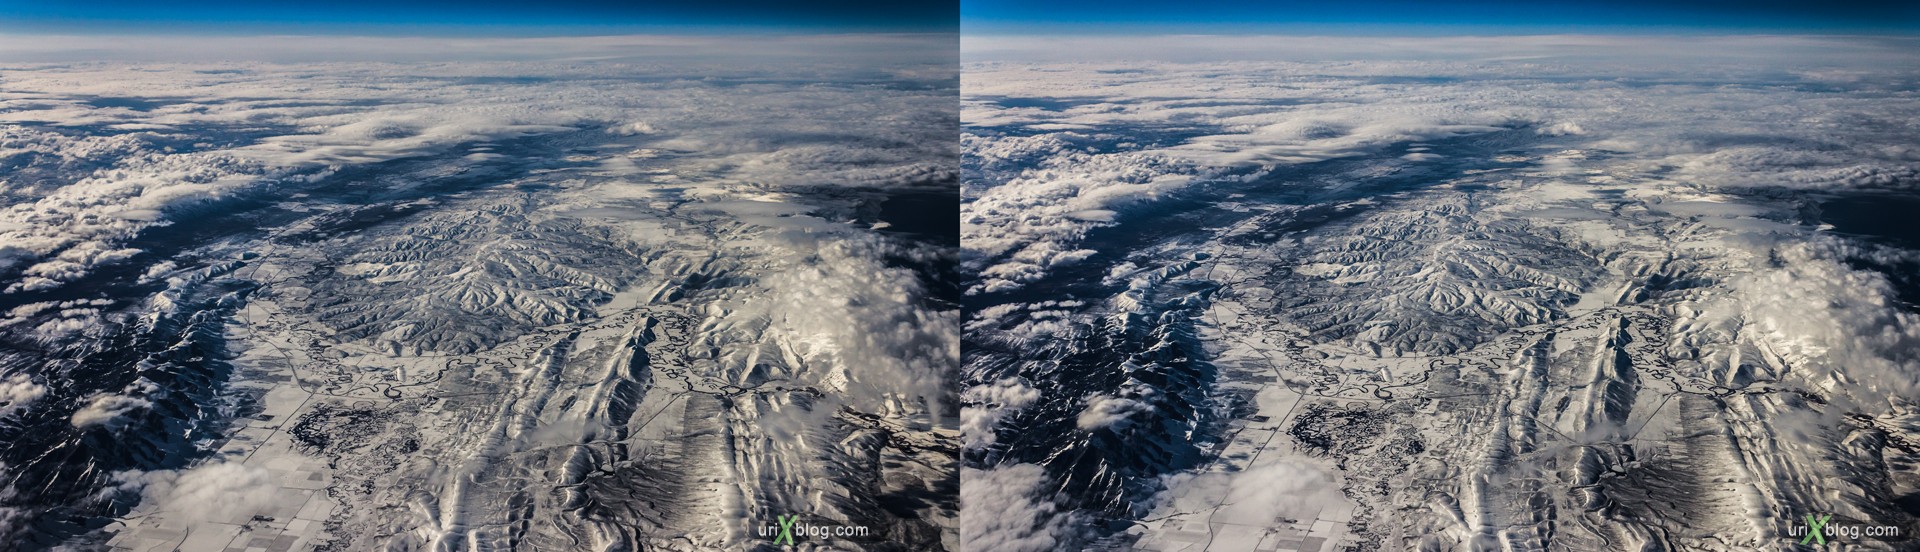 2013, Wyoming, Rocky mountains, USA, panorama, airplane, black and white, bw, snow, ice, clouds, horizon, 3D, stereo pair, cross-eyed, crossview, cross view stereo pair, stereoscopic